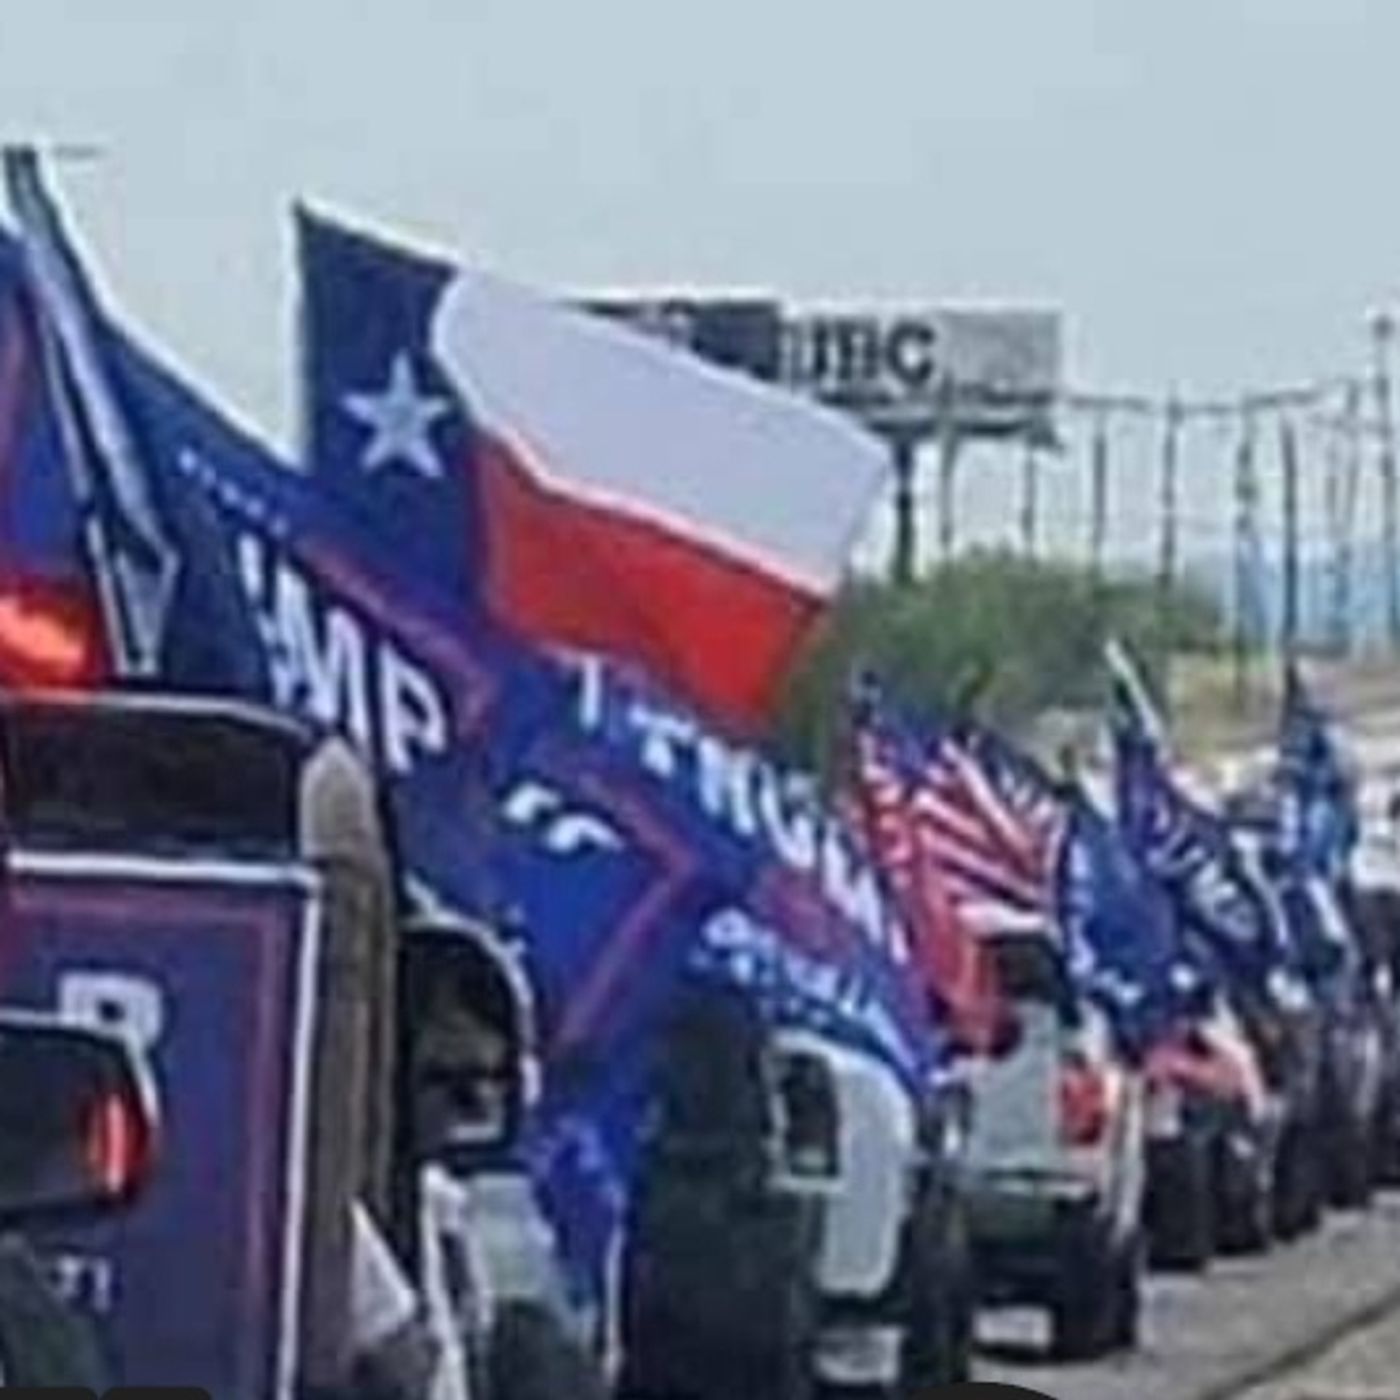 Trump Car Parades Across Country as Hundreds of Vehicles Drive Out in Support of President